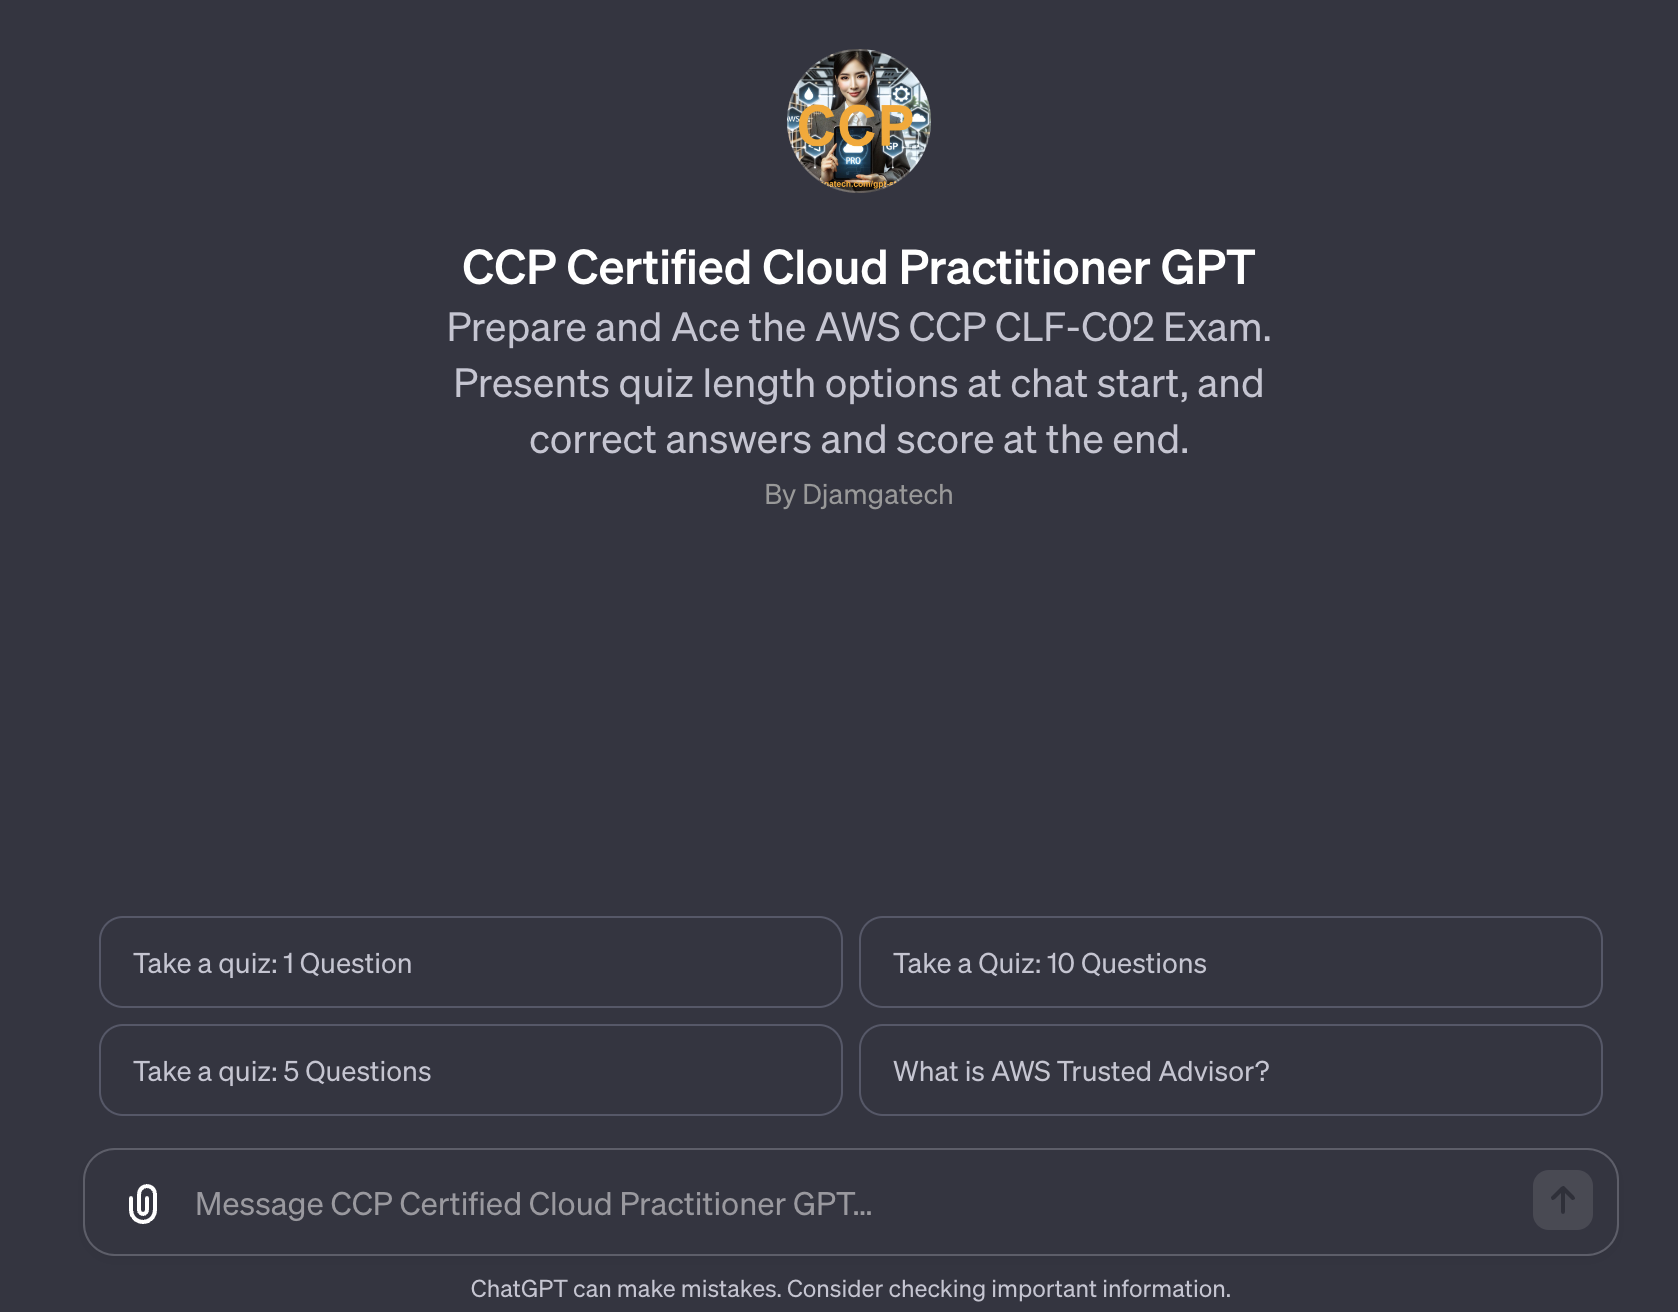 Ace the AWS Cloud Practitioner Certification CCP CLF-C02 Exam with GPT